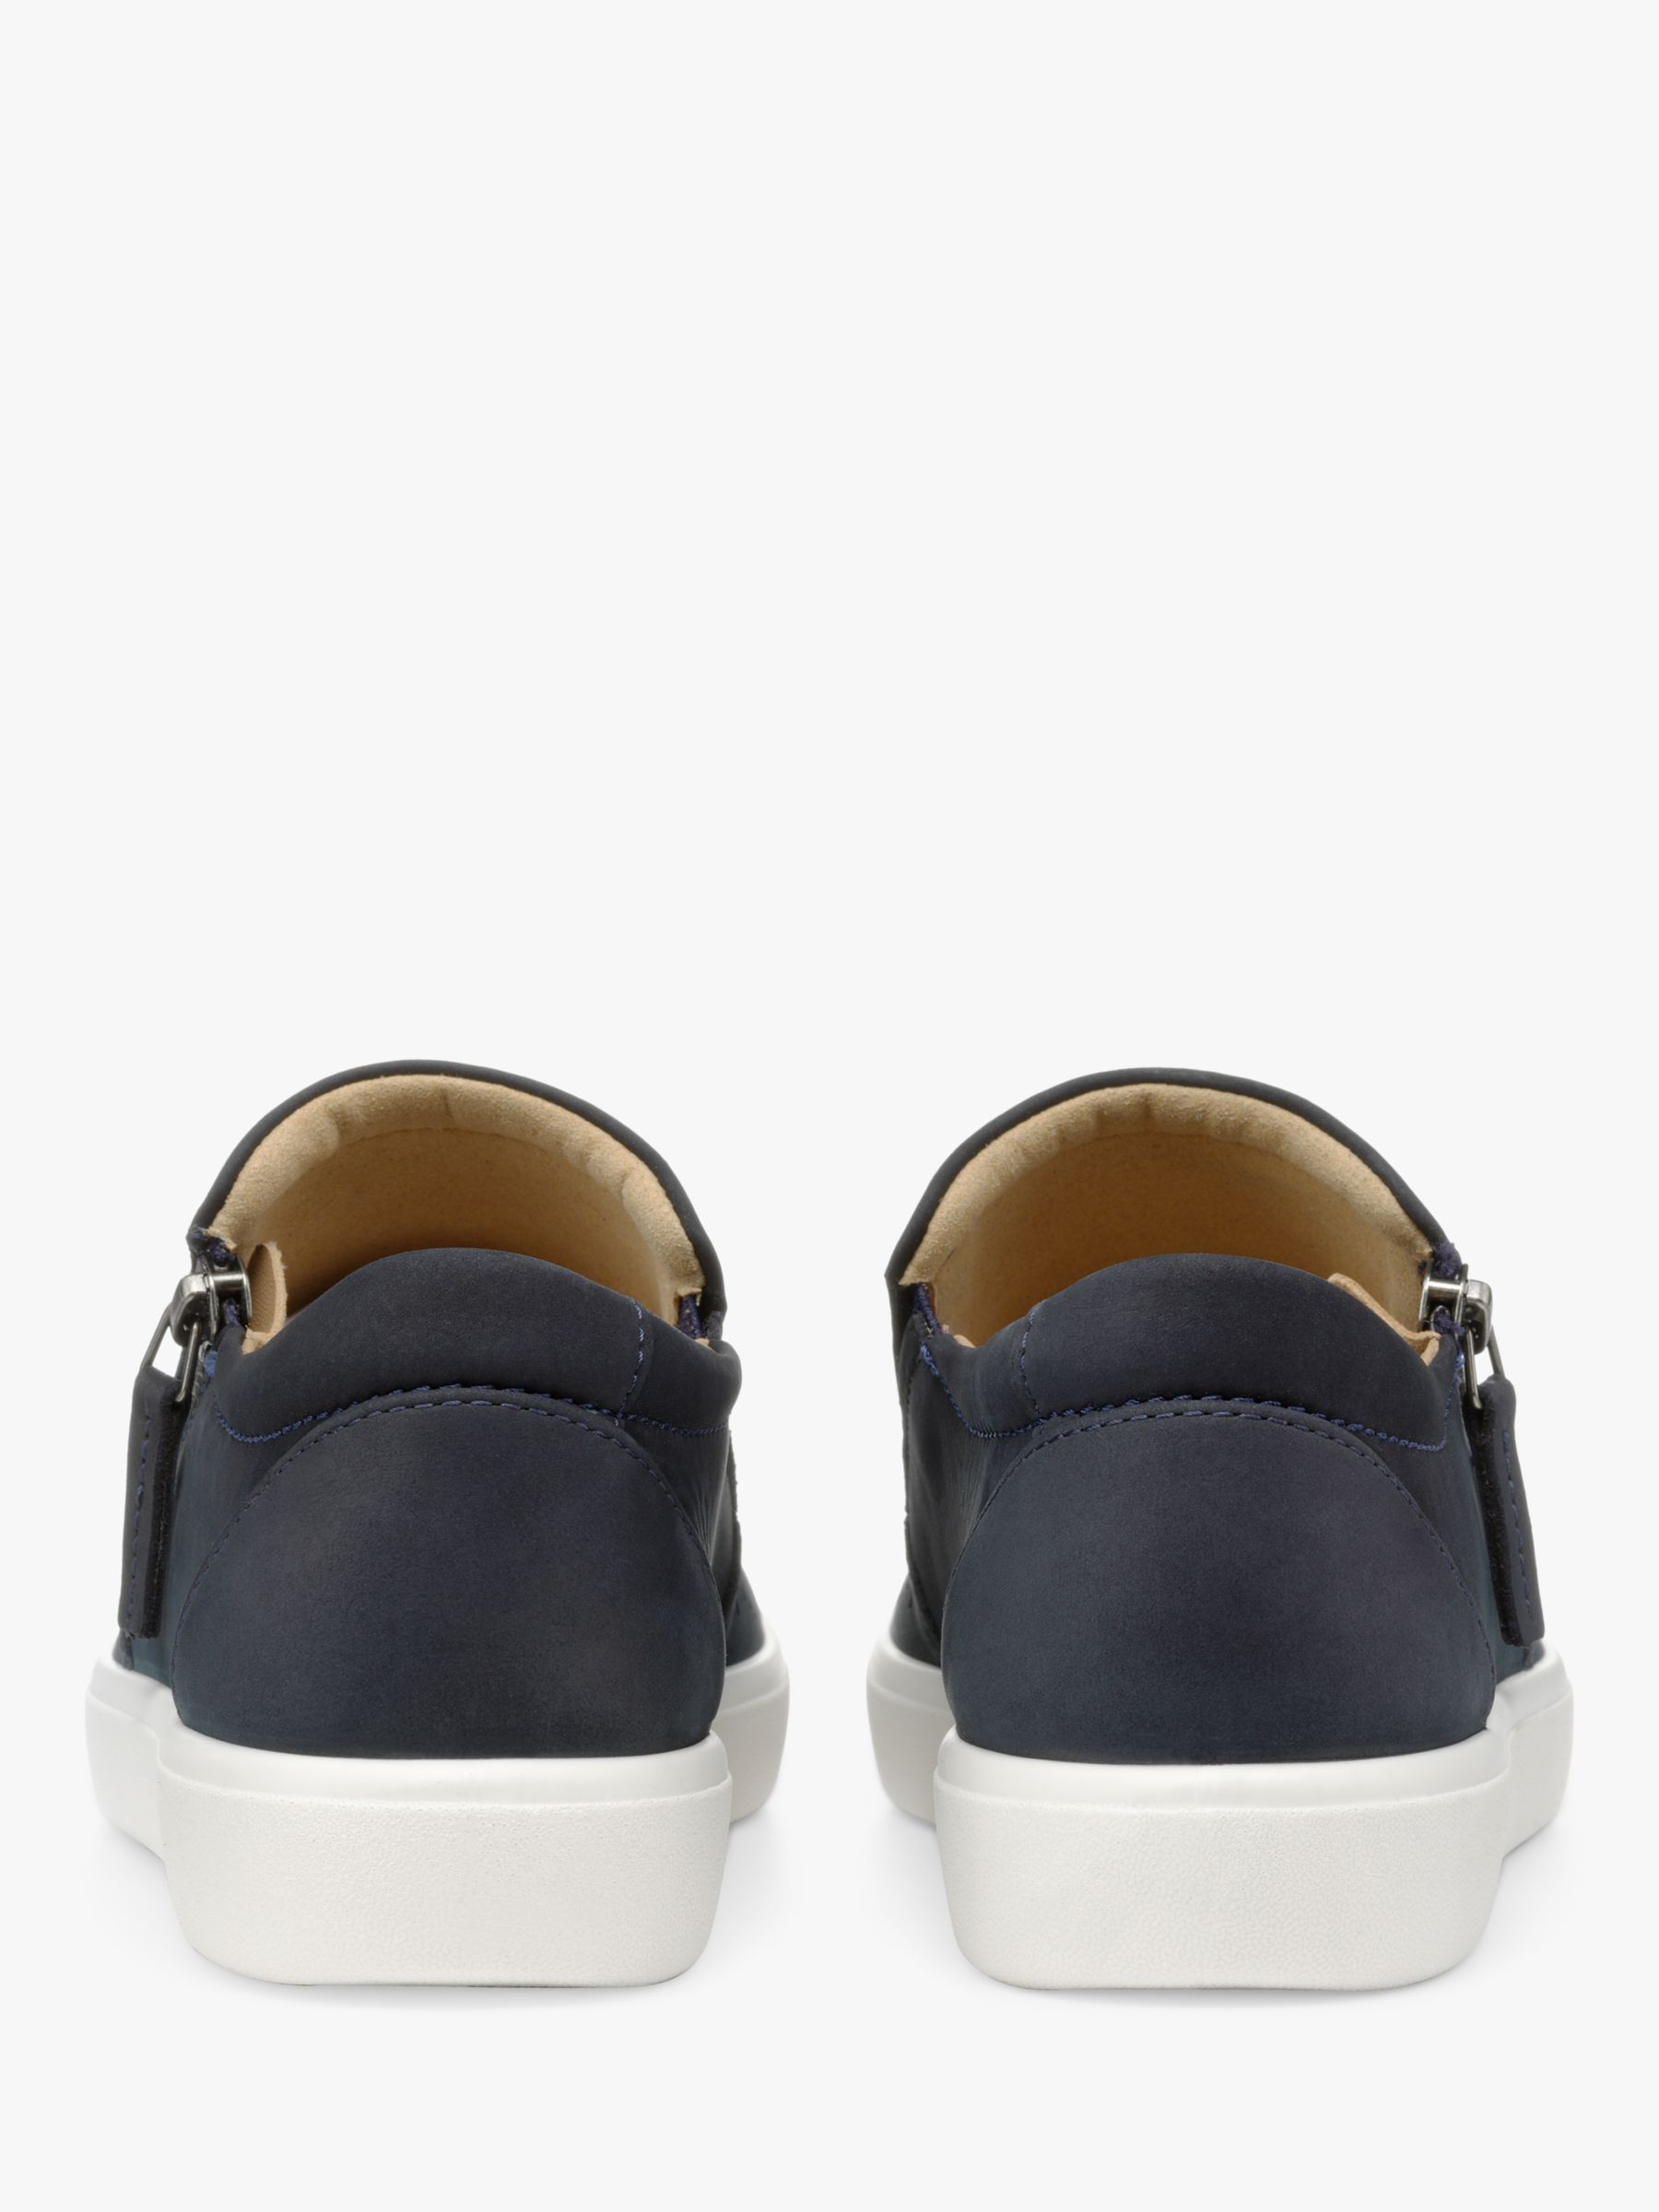 Buy Hotter Daisy Wide Fit Summer Deck Shoes Online at johnlewis.com